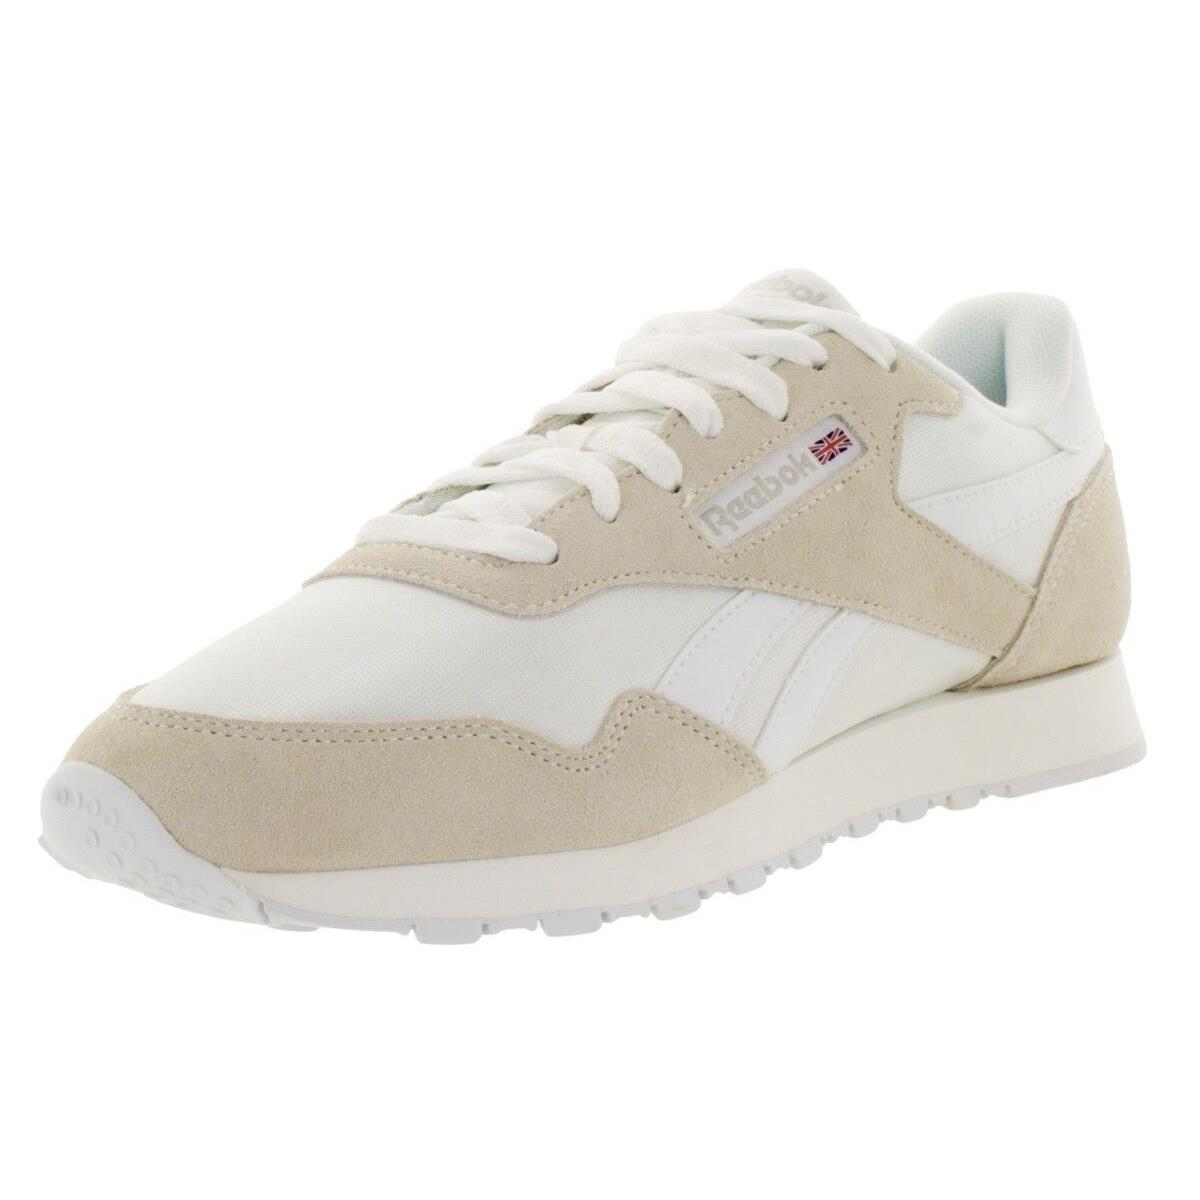 Reebok Men`s Royal Classic Nylon Running Shoes Shoe in White in Sizes 6.5 to 15 - White